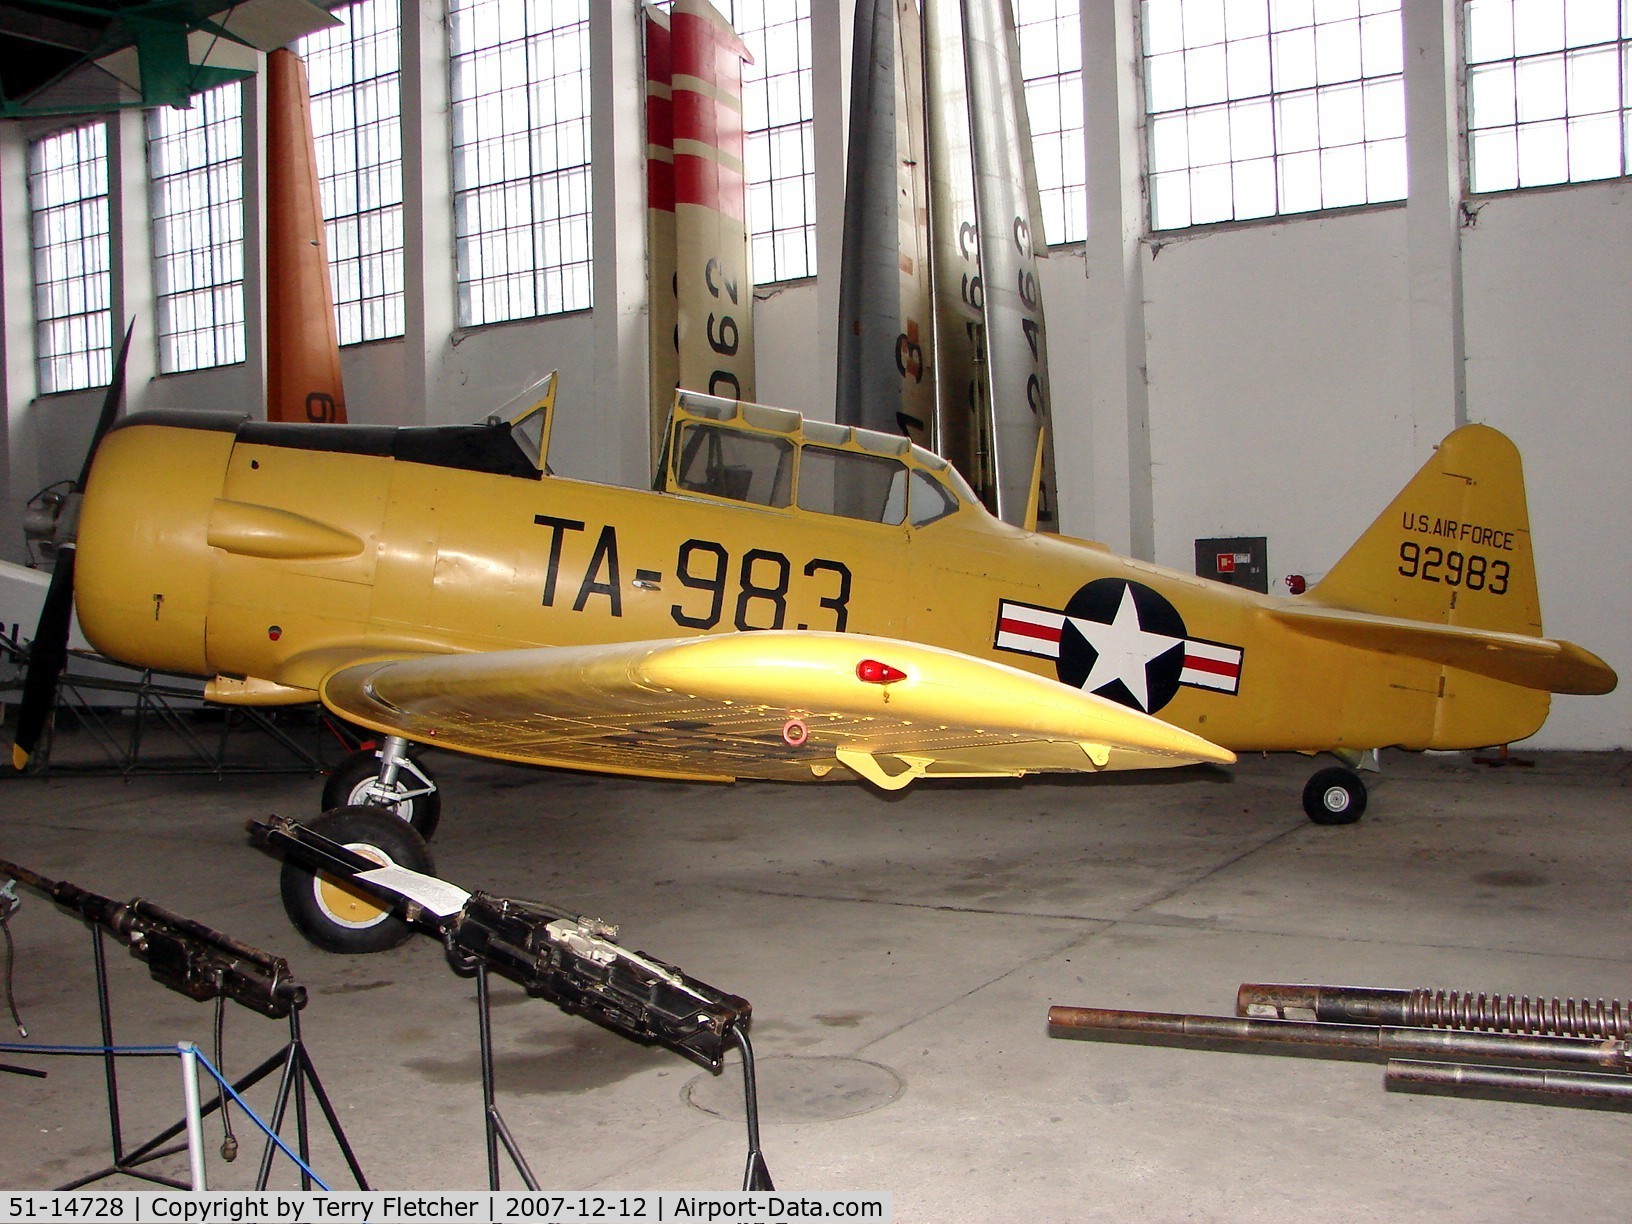 51-14728, North American T-6G Texan C/N 182-415, Atlyhough this texan is painted (4)92983 and preserved at the Poland Aviation Museum in Krakow - it originally was 41-35201  before becoming 51-14728. This aircraft is not to be confused with F-AZVN which also wears 49-2983 on its tail fin and still flies